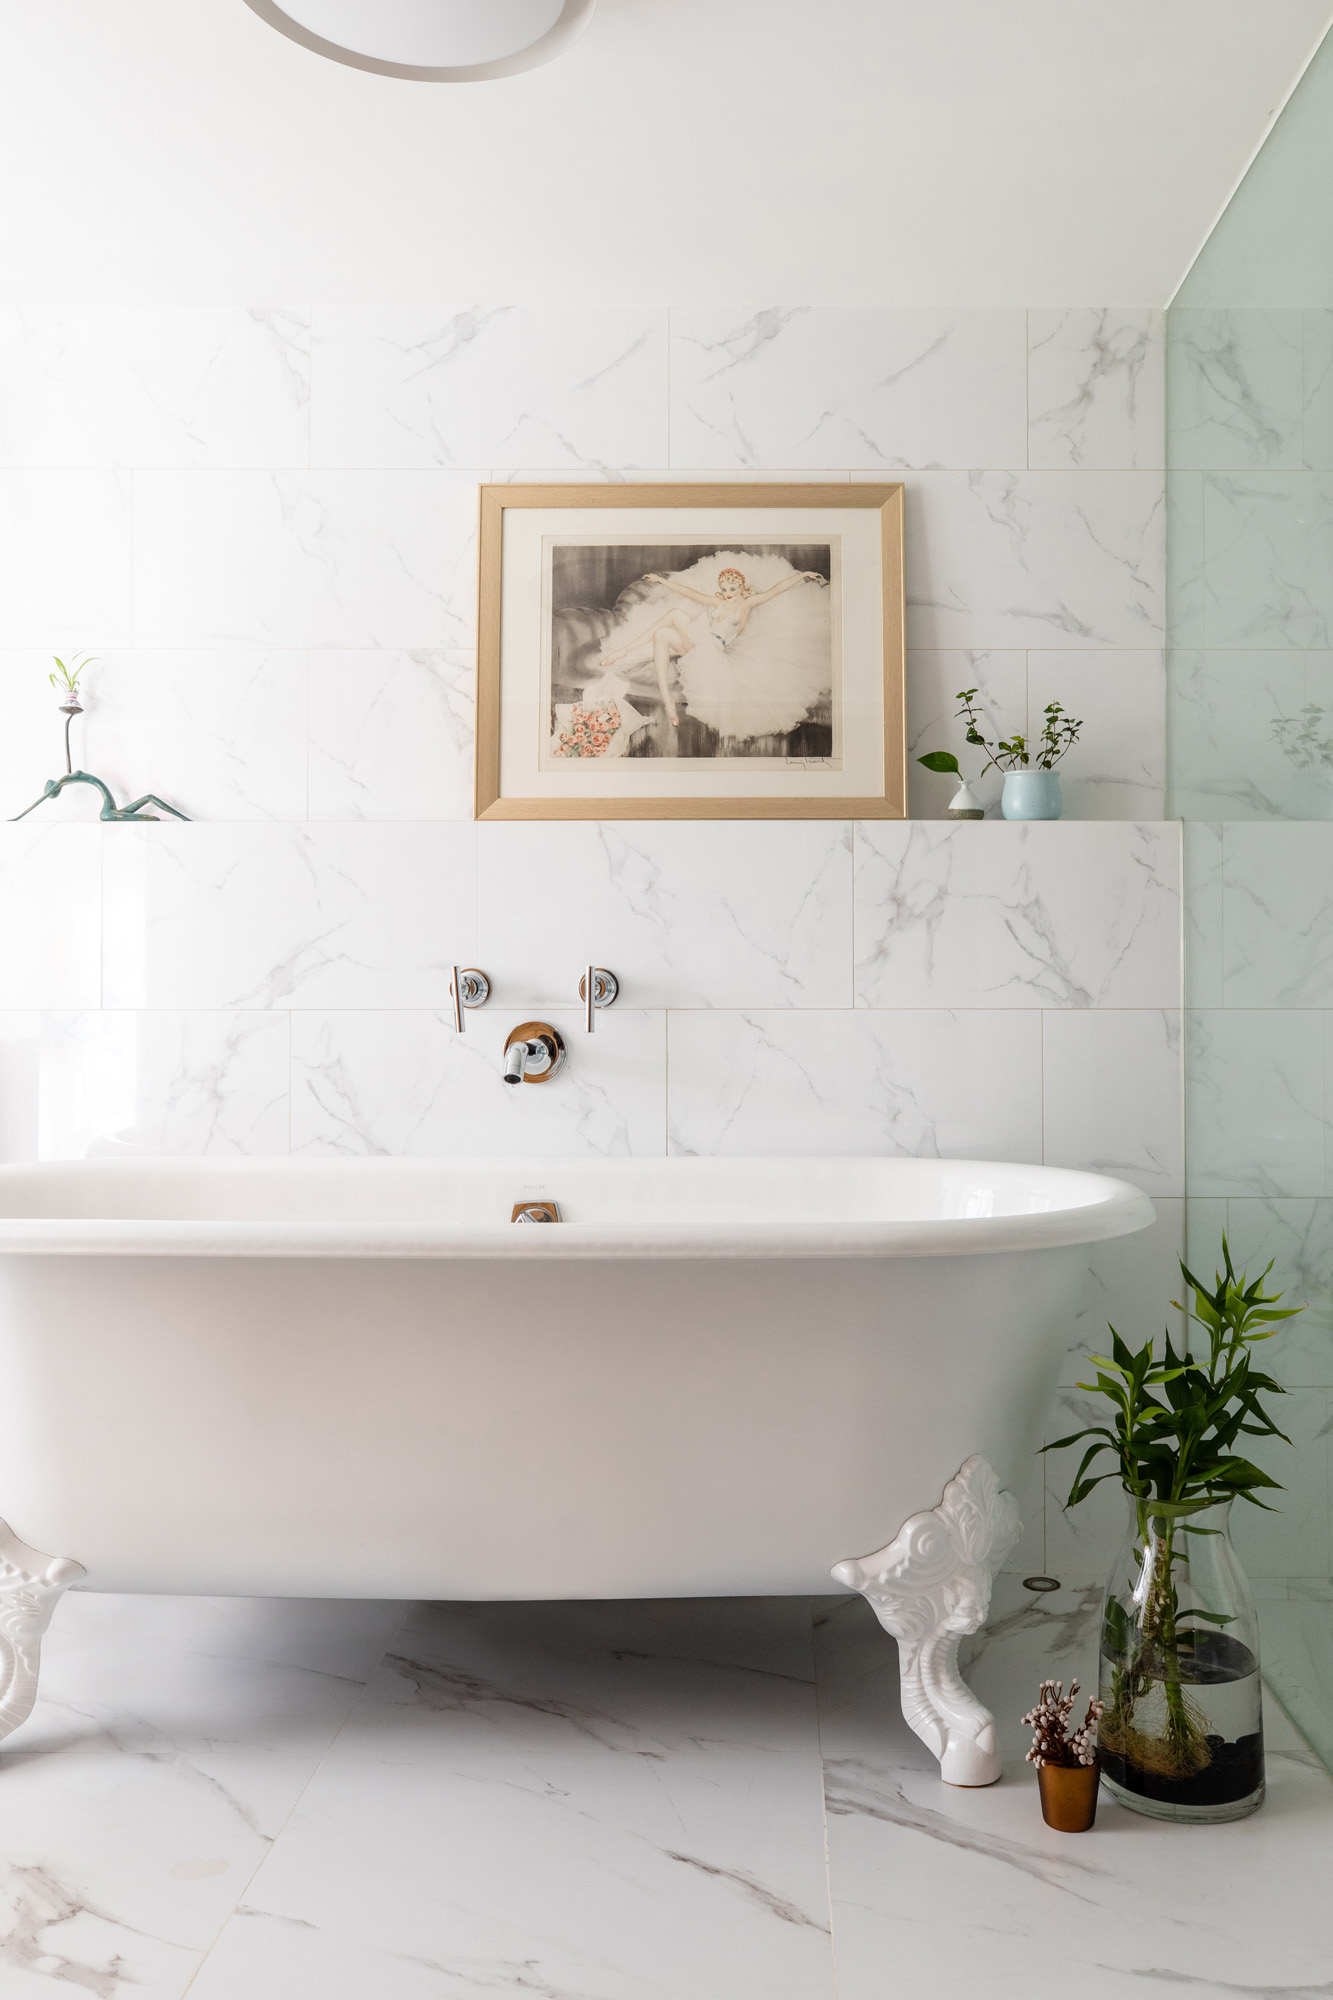 Clawfoot tub bathroom details • Home Interior Design Photos • Tracy Wong Photography